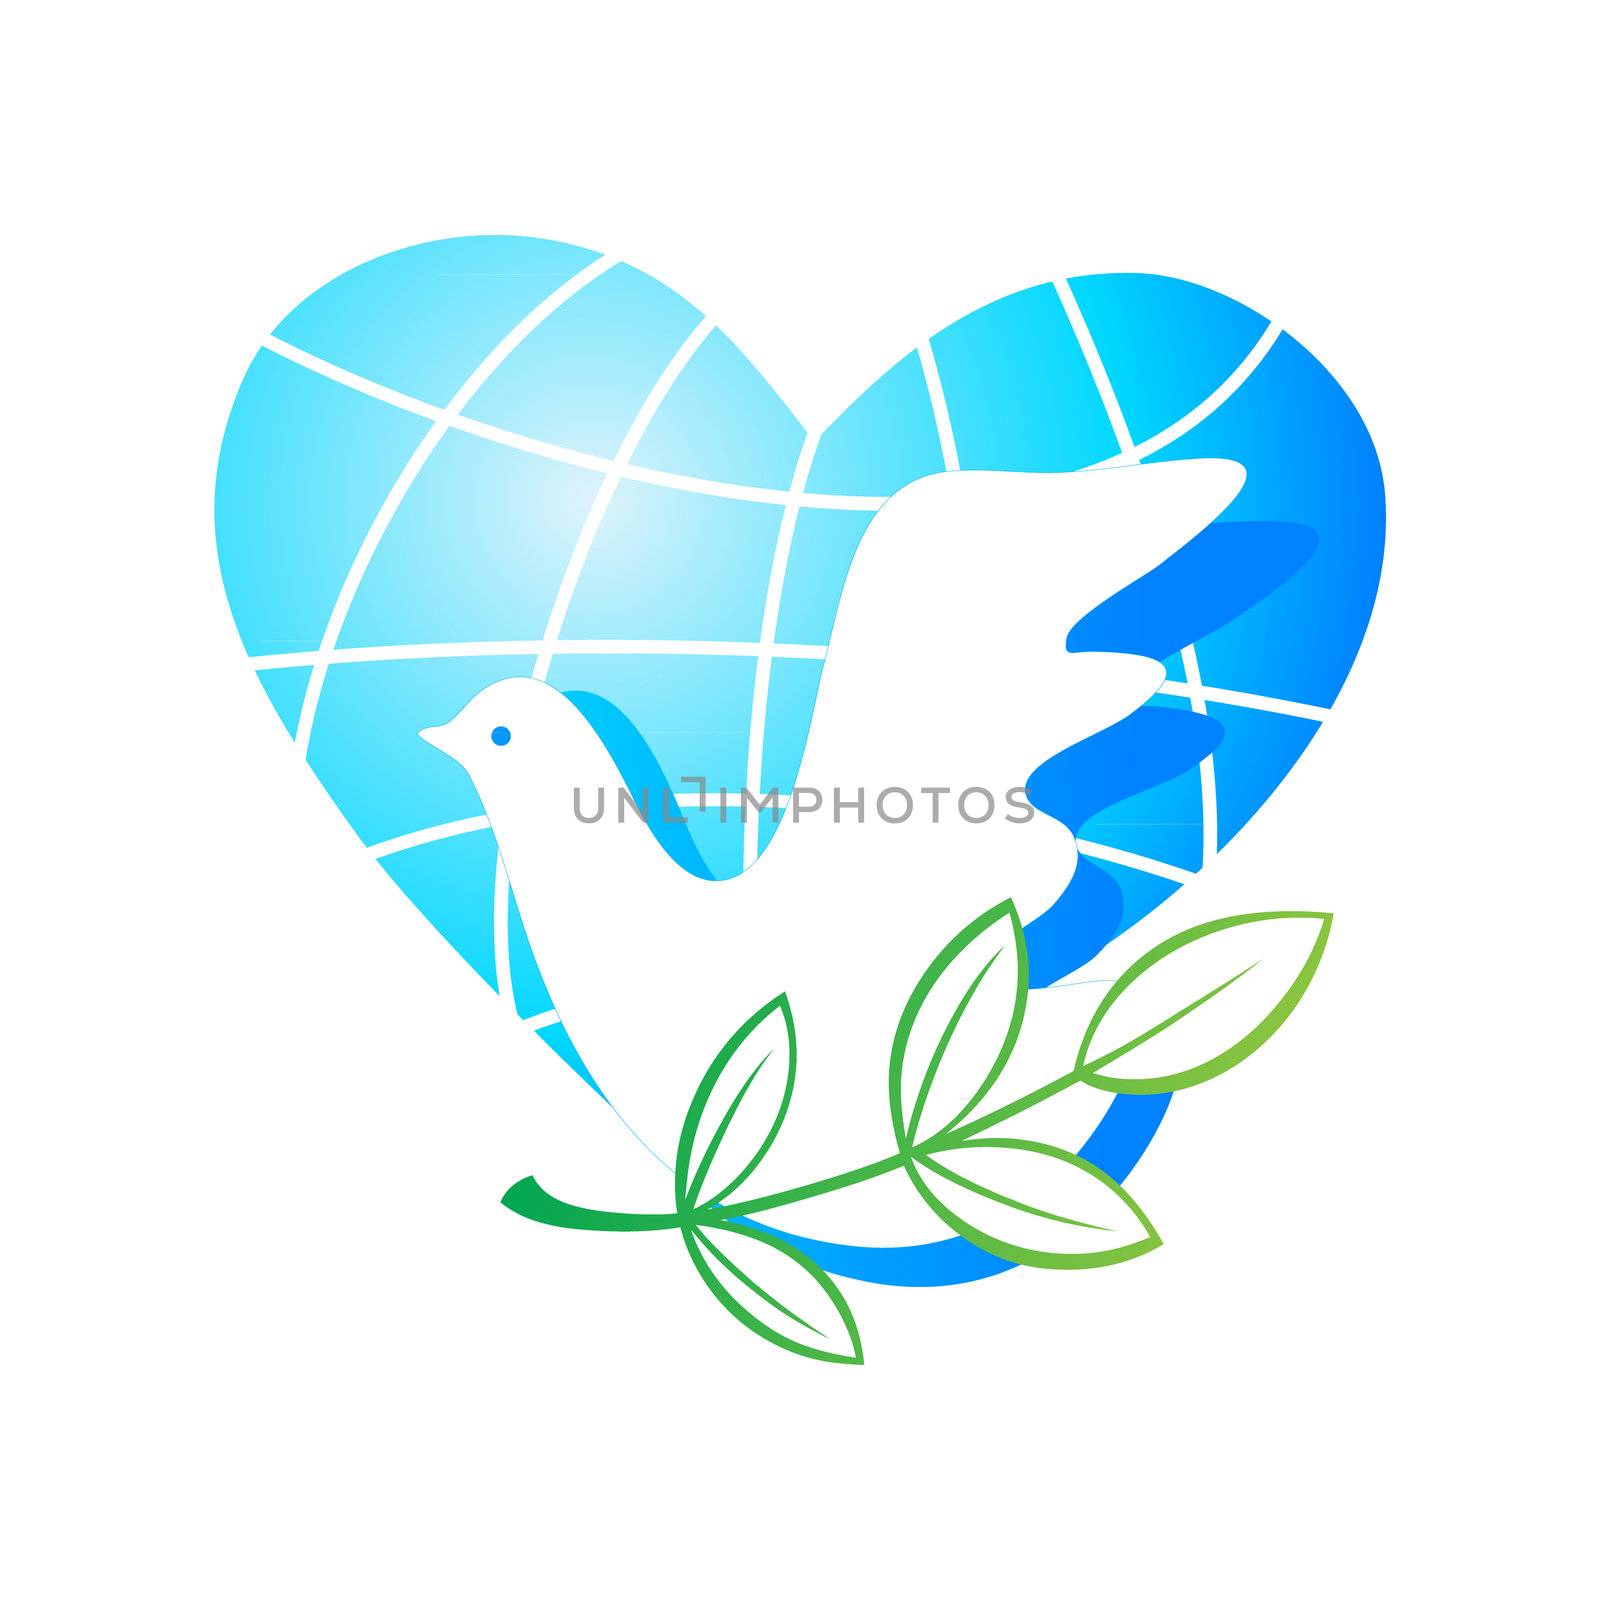 Peace on Earth - the traditional symbols - the planet of a heart, a dove with a green branch.